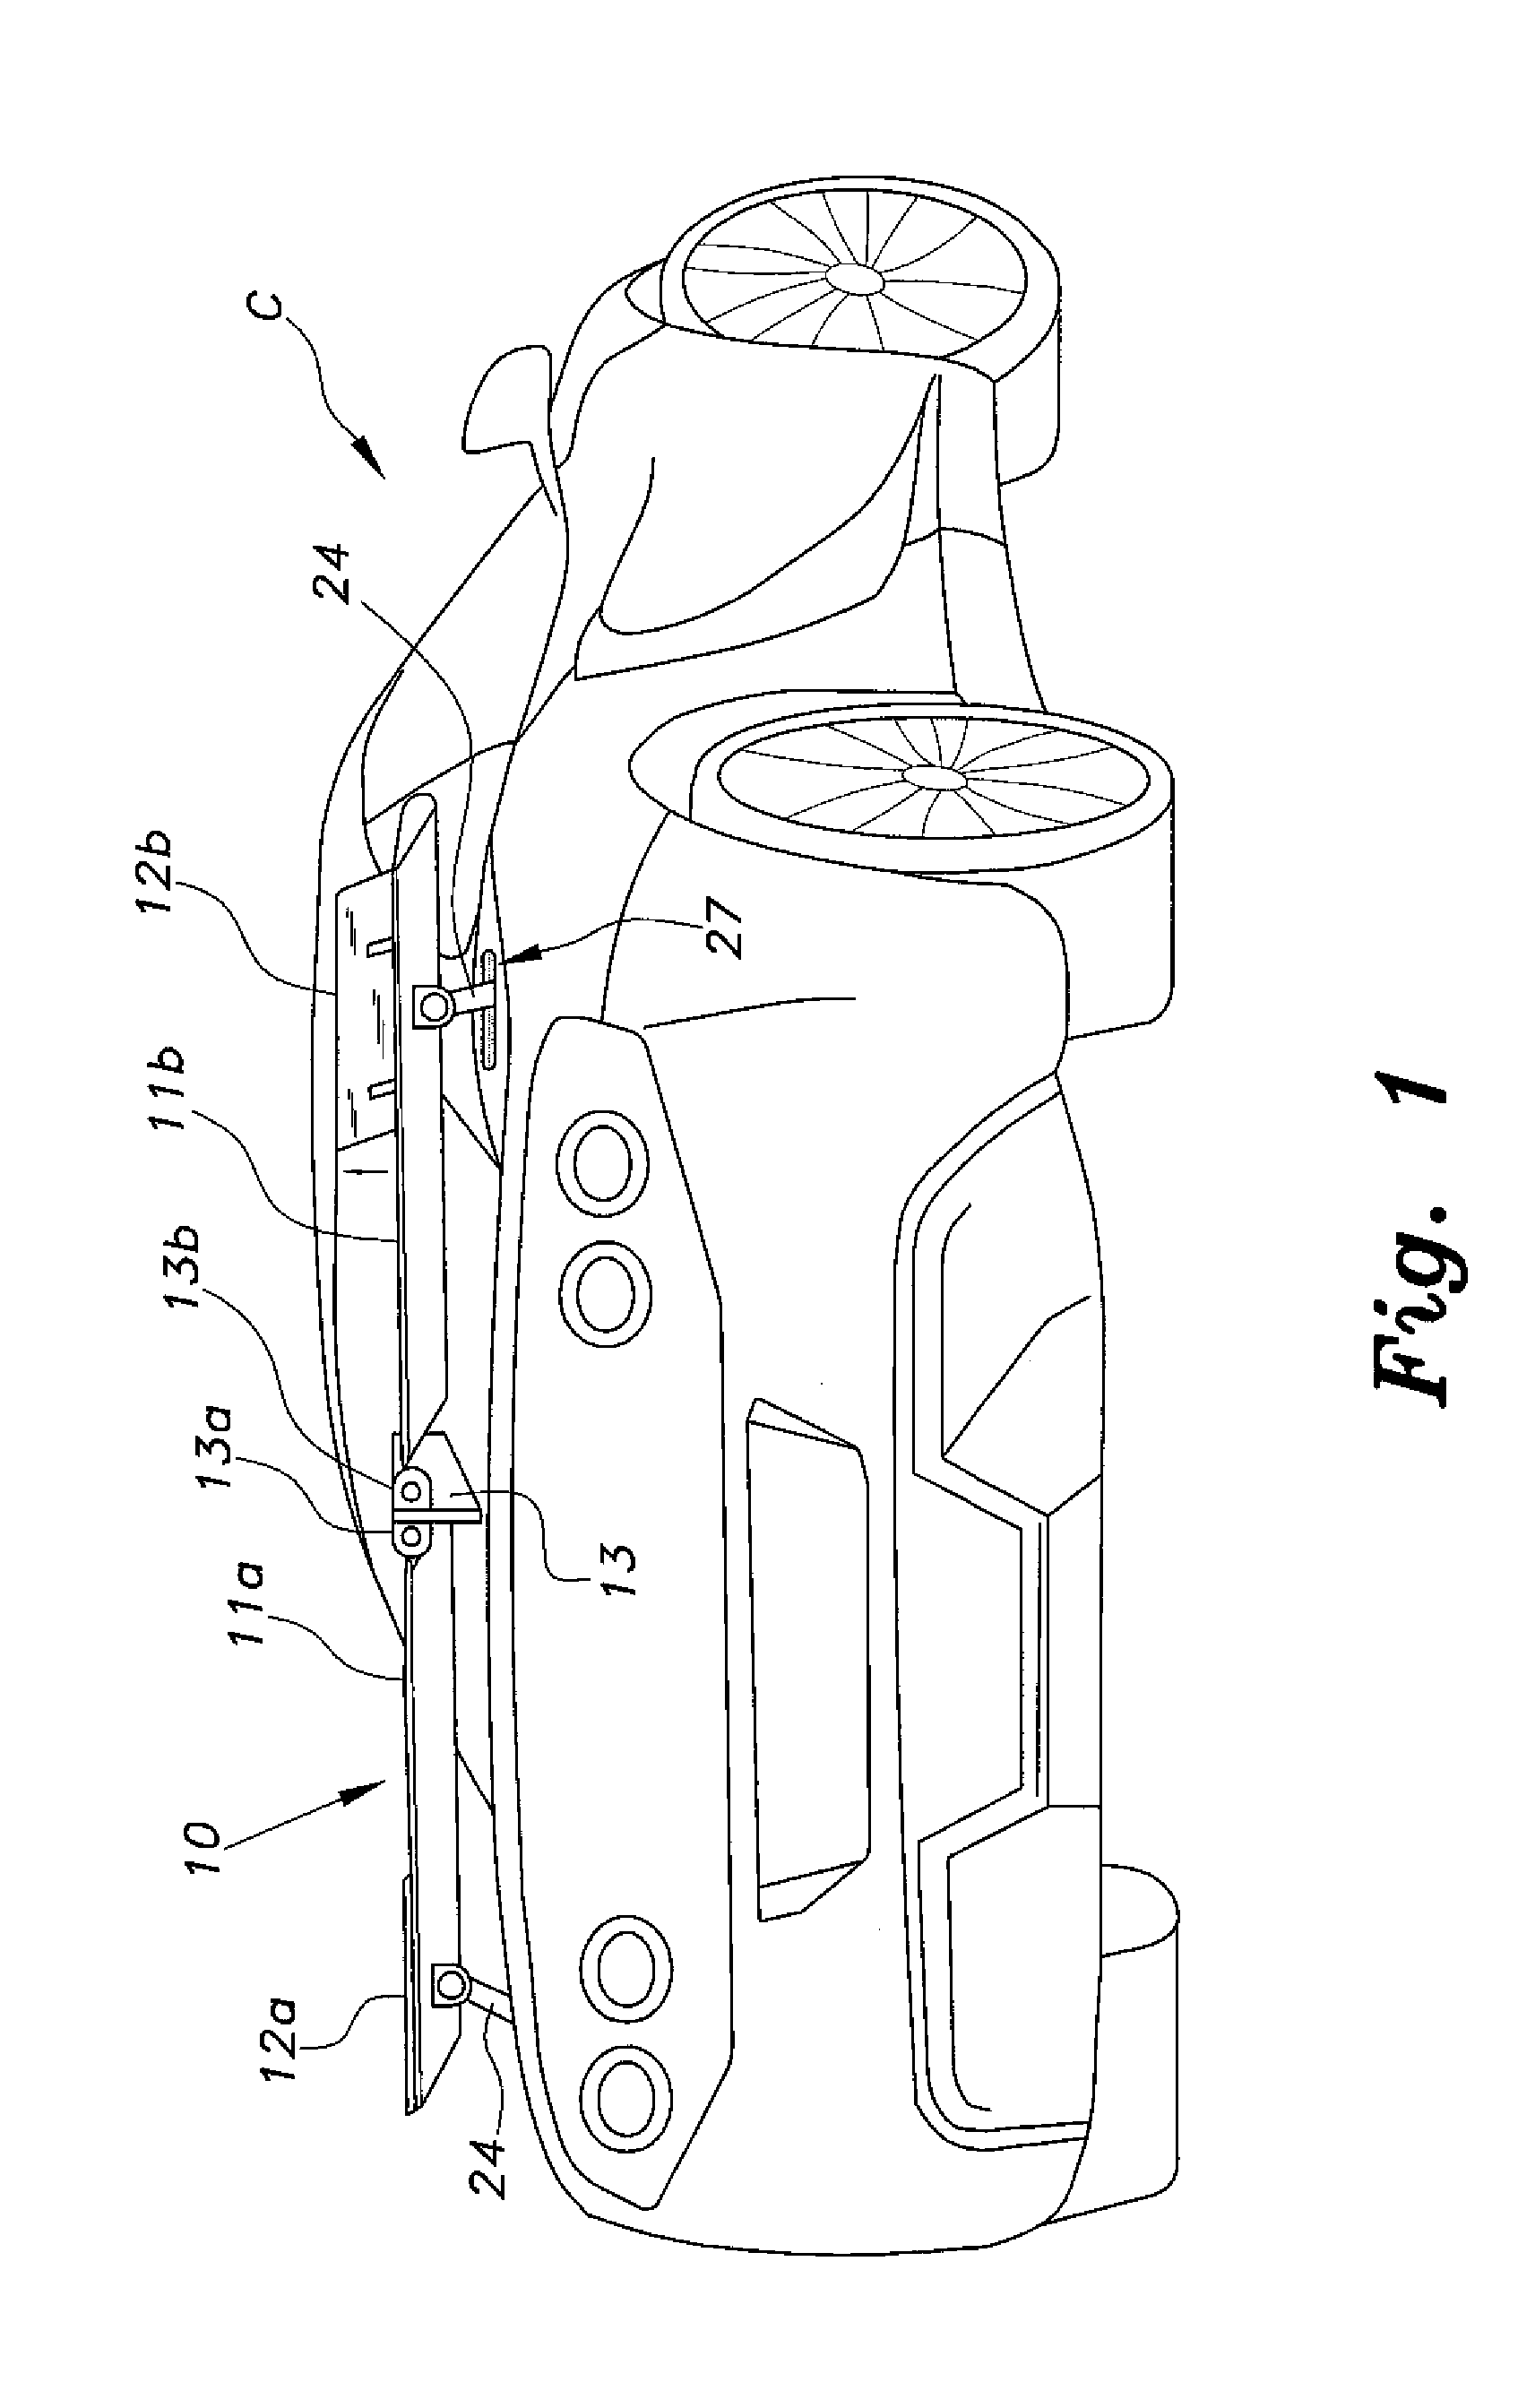 Dynamically adjustable airfoil system for road vehicles